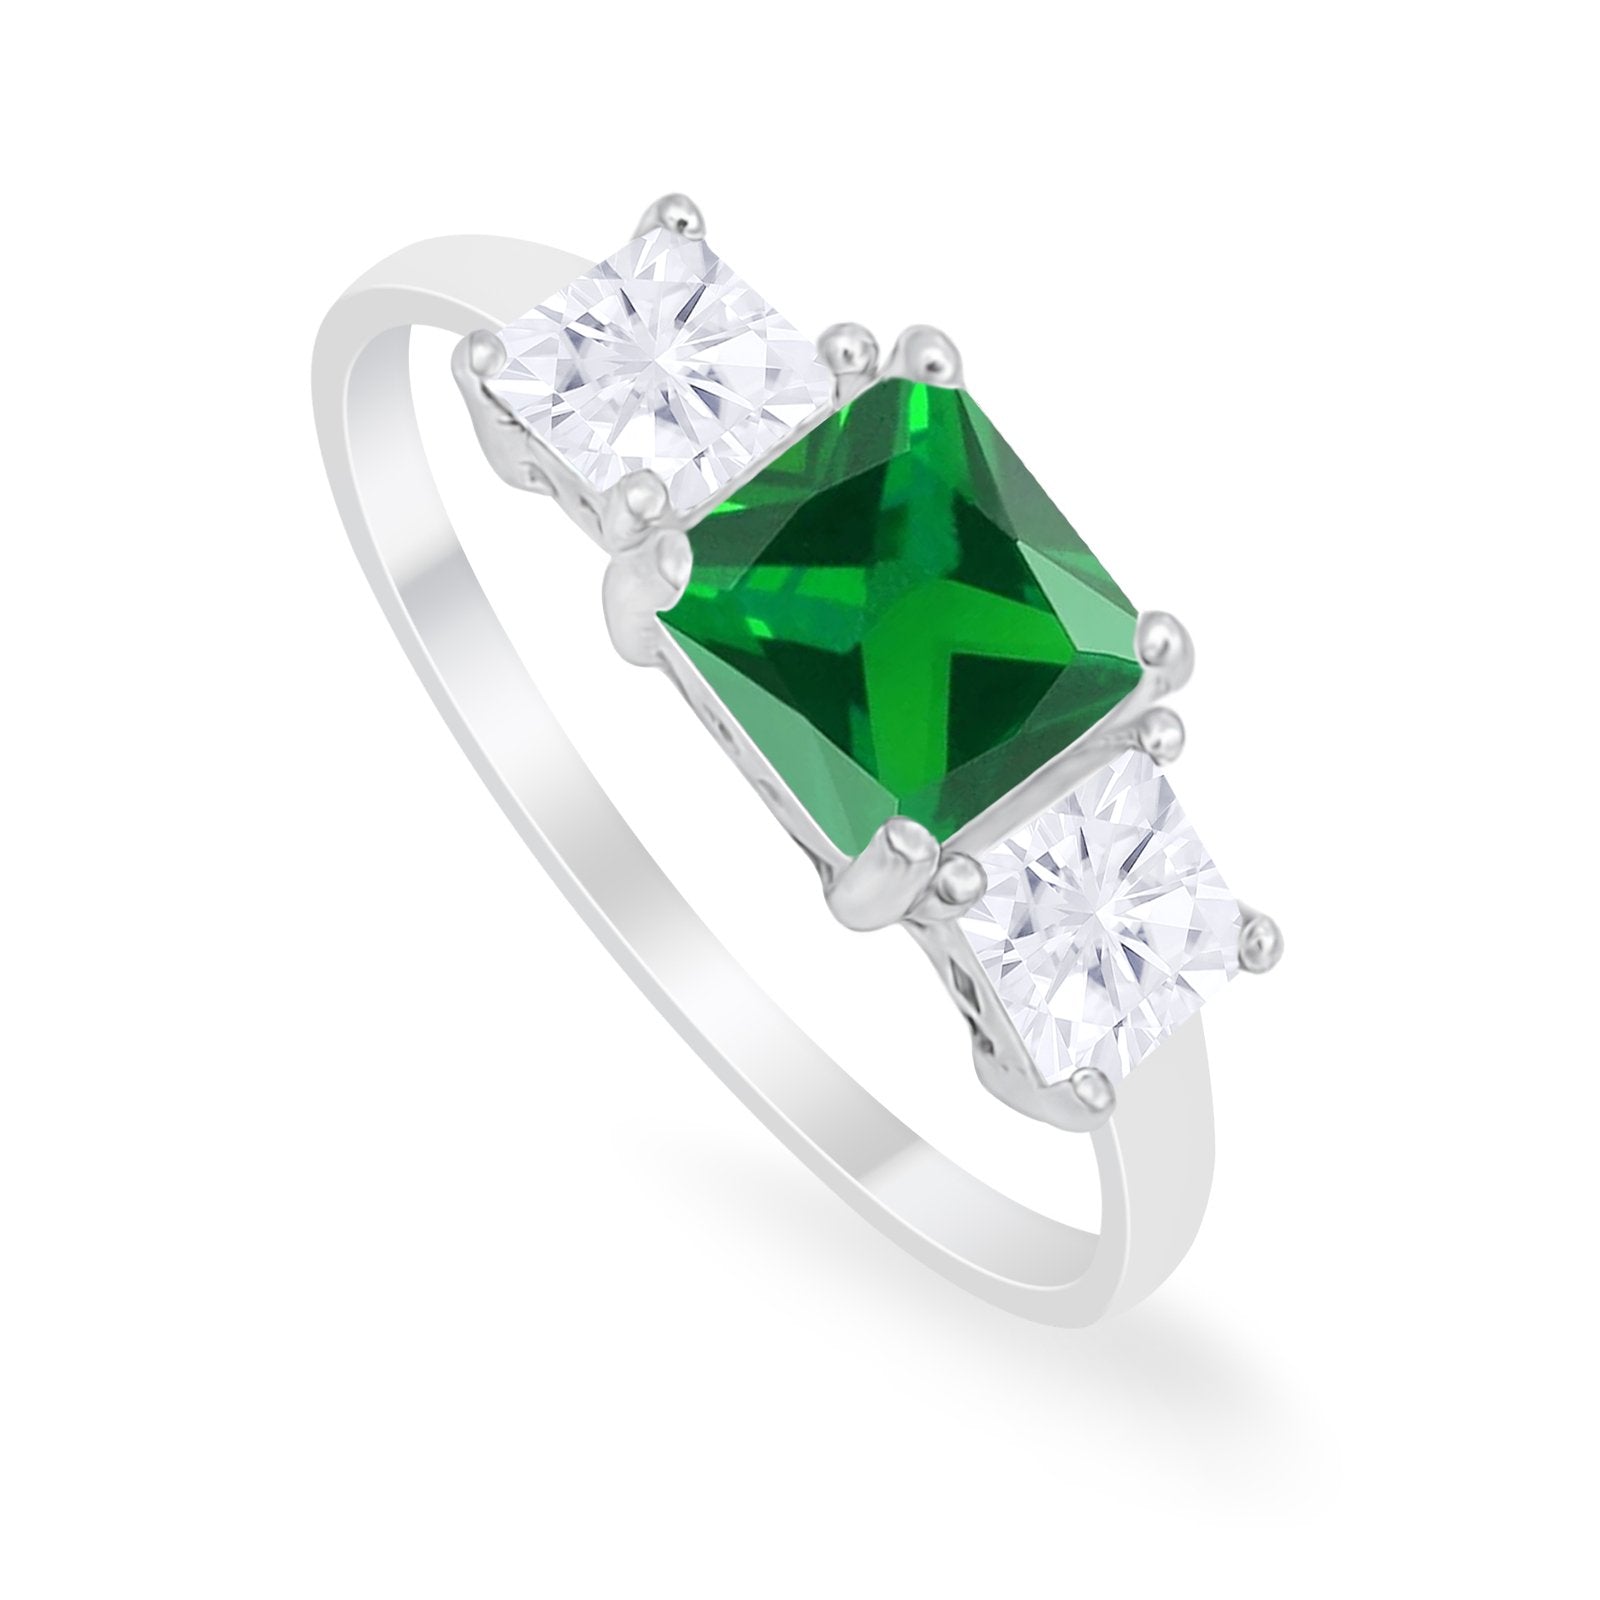 Princess Cut Engagement Ring Simulated Green Emerald CZ 925 Sterling Silver